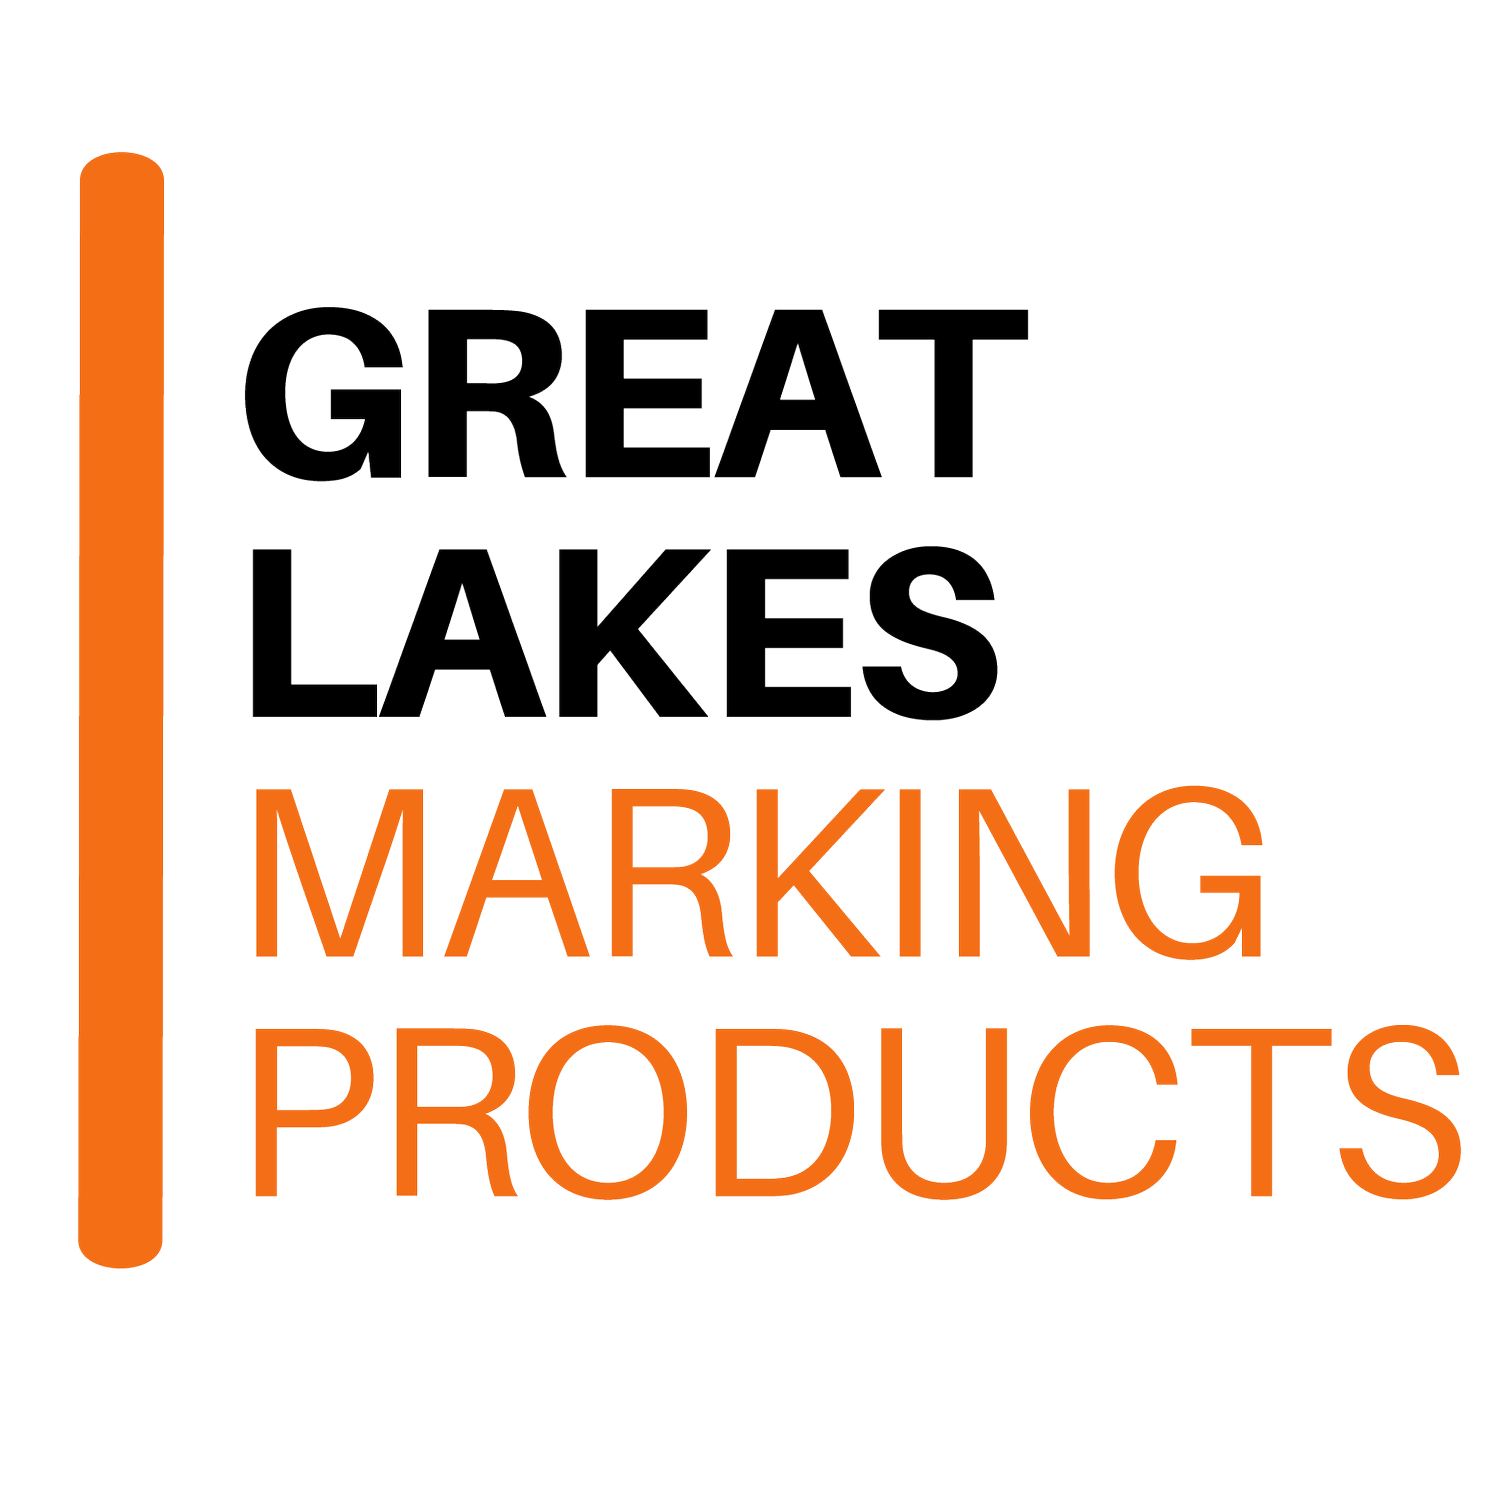 Great Lakes Marking Products